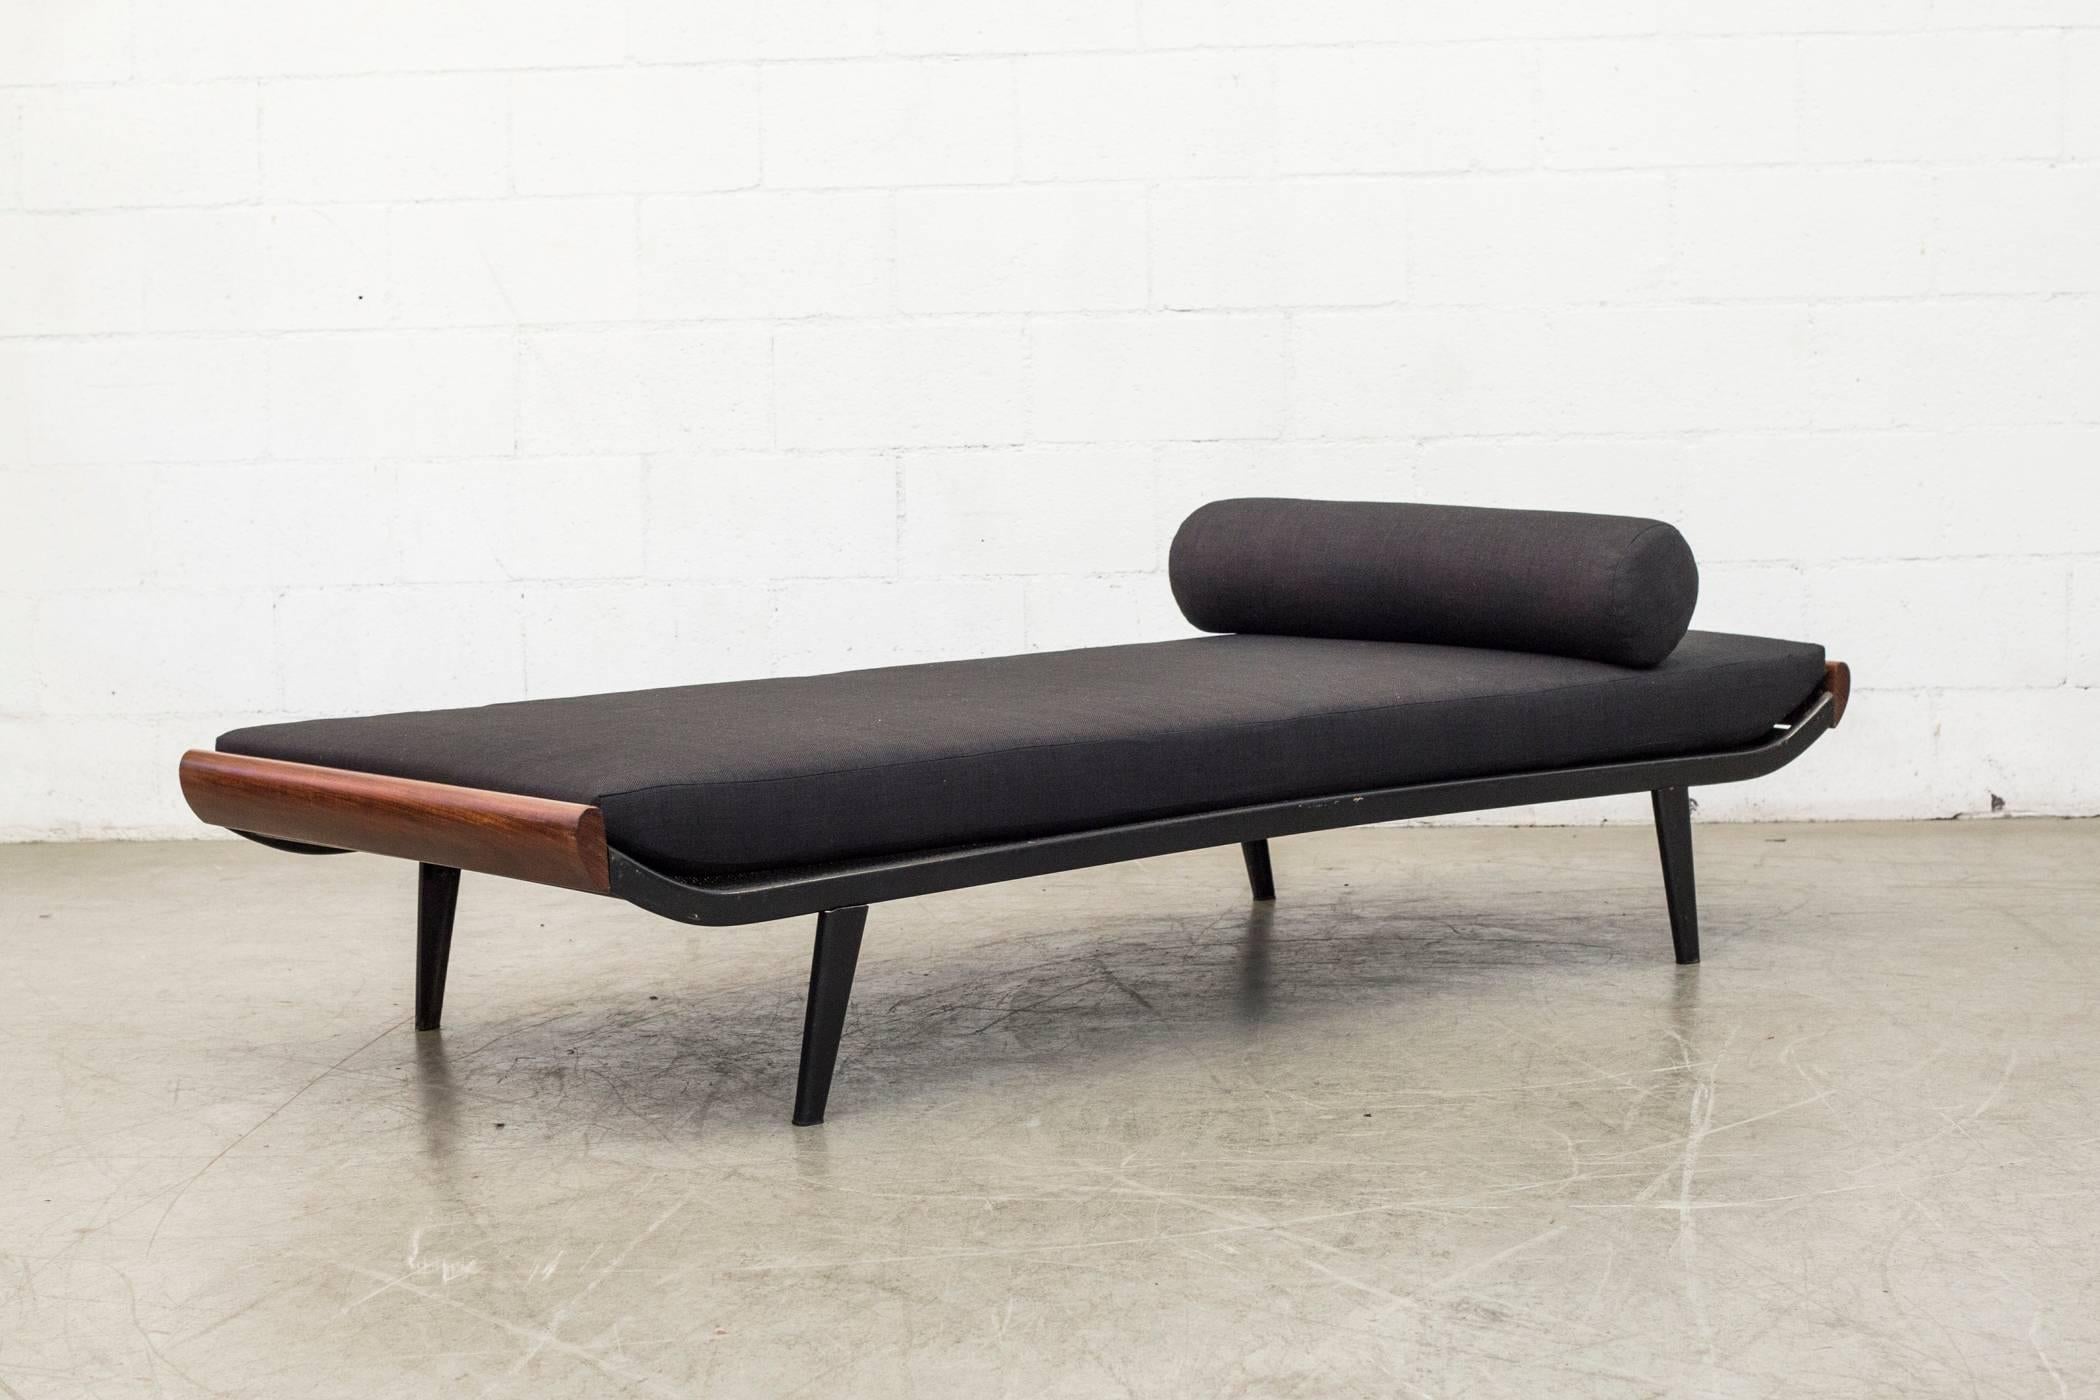 1950s-1960s Cleopatra daybed by A.R. Cordemeyer. Teak wood ends with enameled dark grey metal frame and 